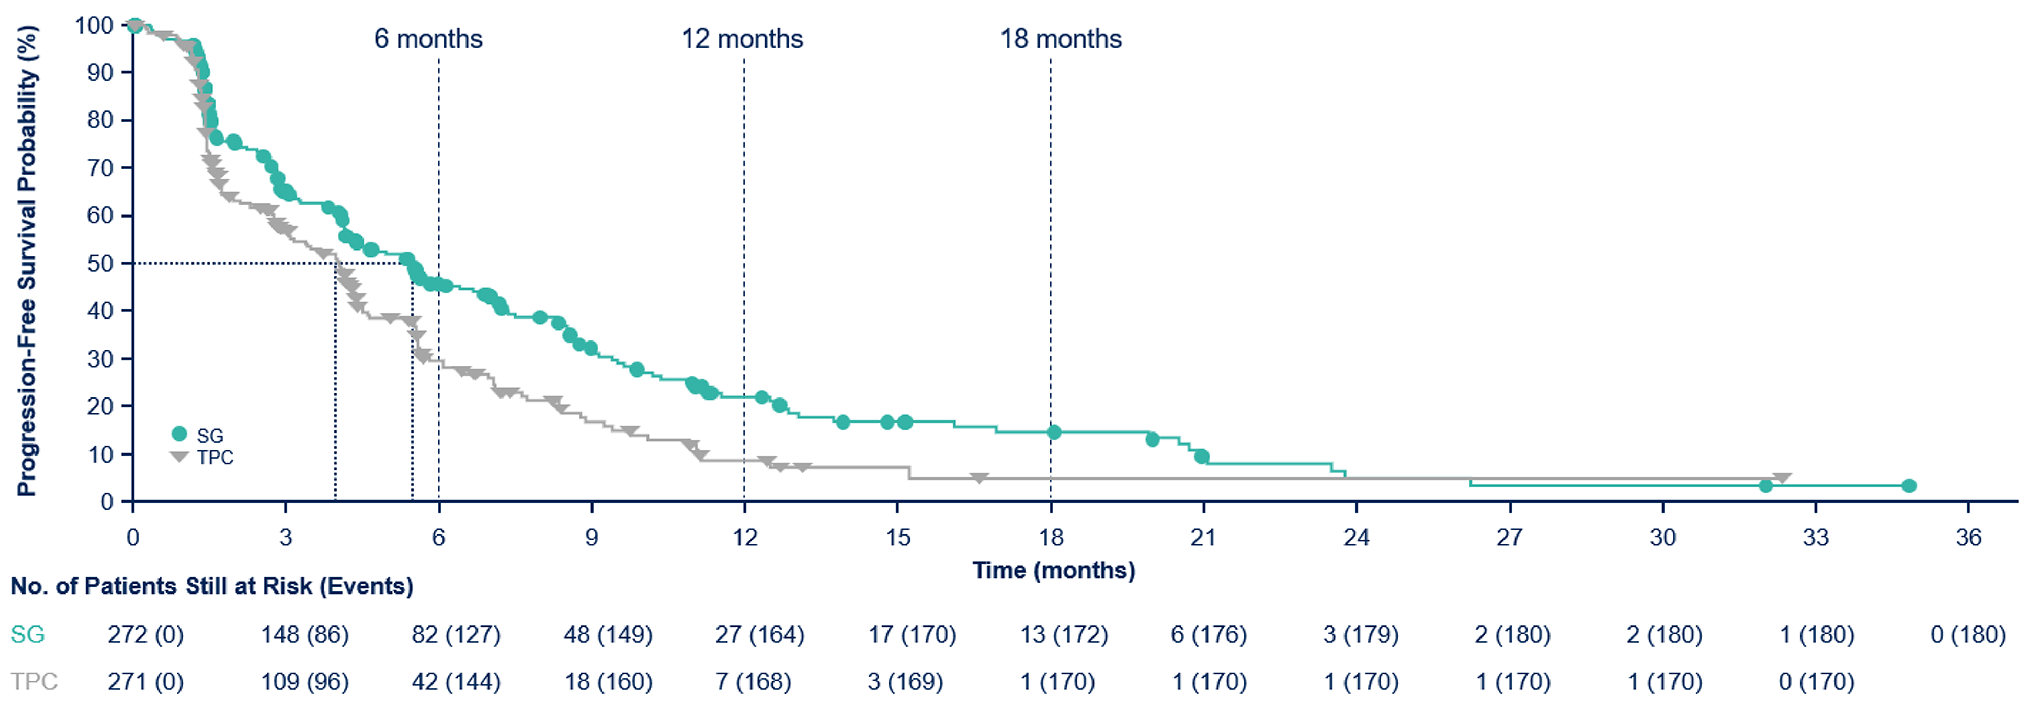 The sacituzumab govitecan and TPC curves separate approximately 1 month after randomization through the remainder of patient follow-up. At 18 months, the KM estimates were 14.4% (95% CI, 9.1 to 20.8) in the sacituzumab govitecan group and 4.7% (95% CI, 1.3 to 11.6) in the TPC group.